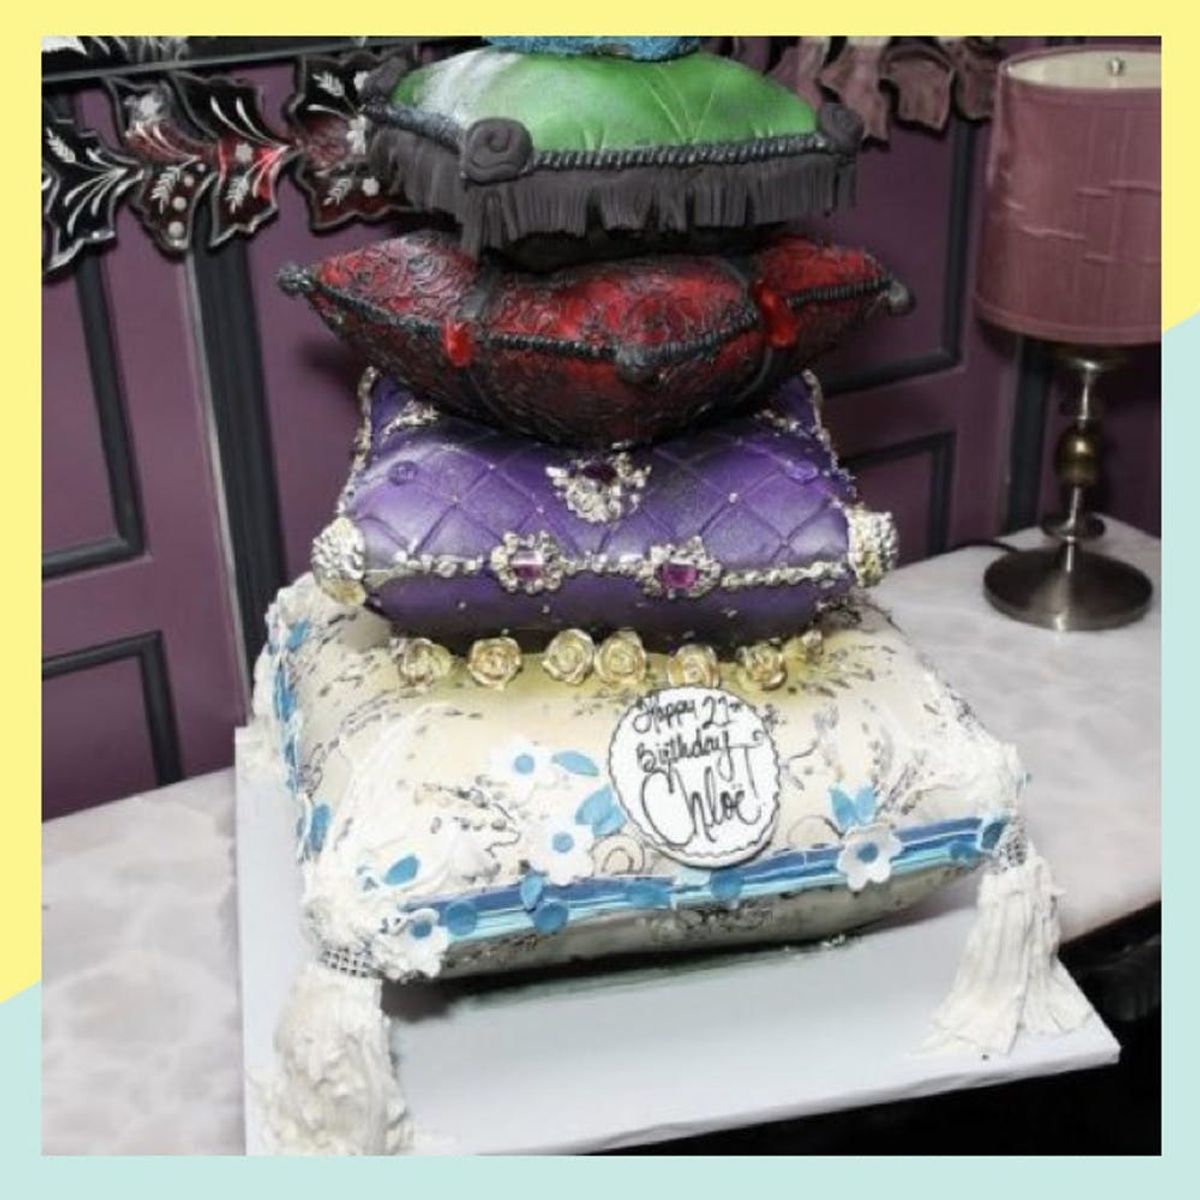 Chloë Grace Moretz Had the Most Outrageous Cake at Her 21st Birthday Party